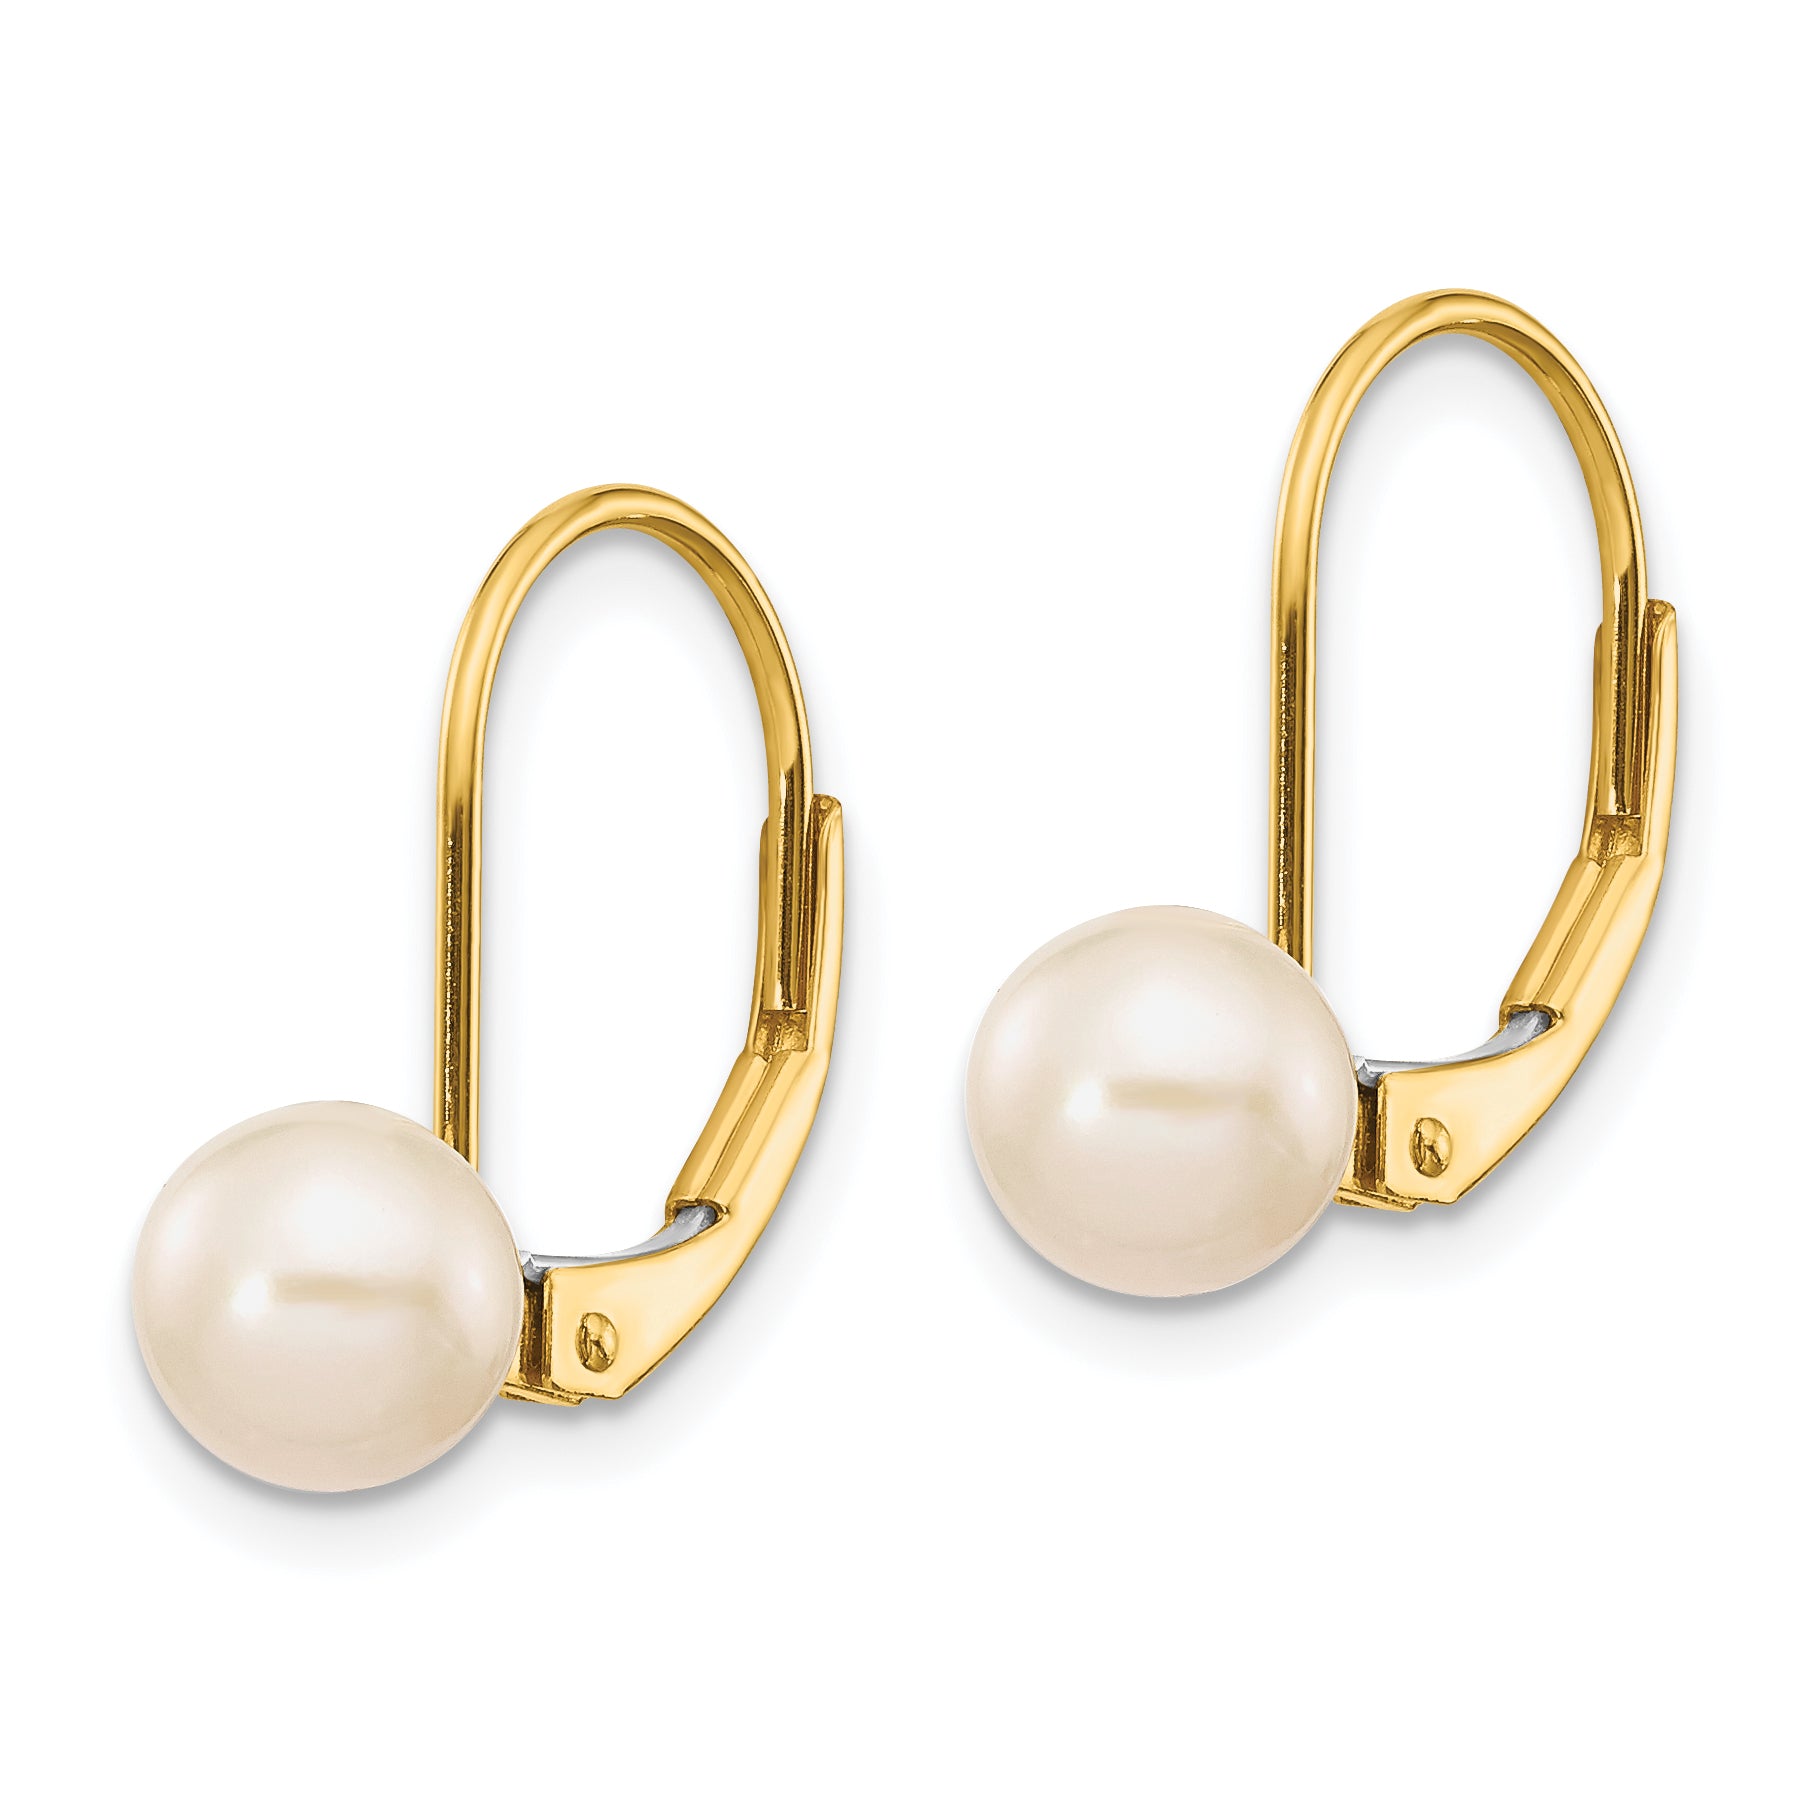 14k 6-7mm White Round Freshwater Cultured Pearl Leverback Earrings